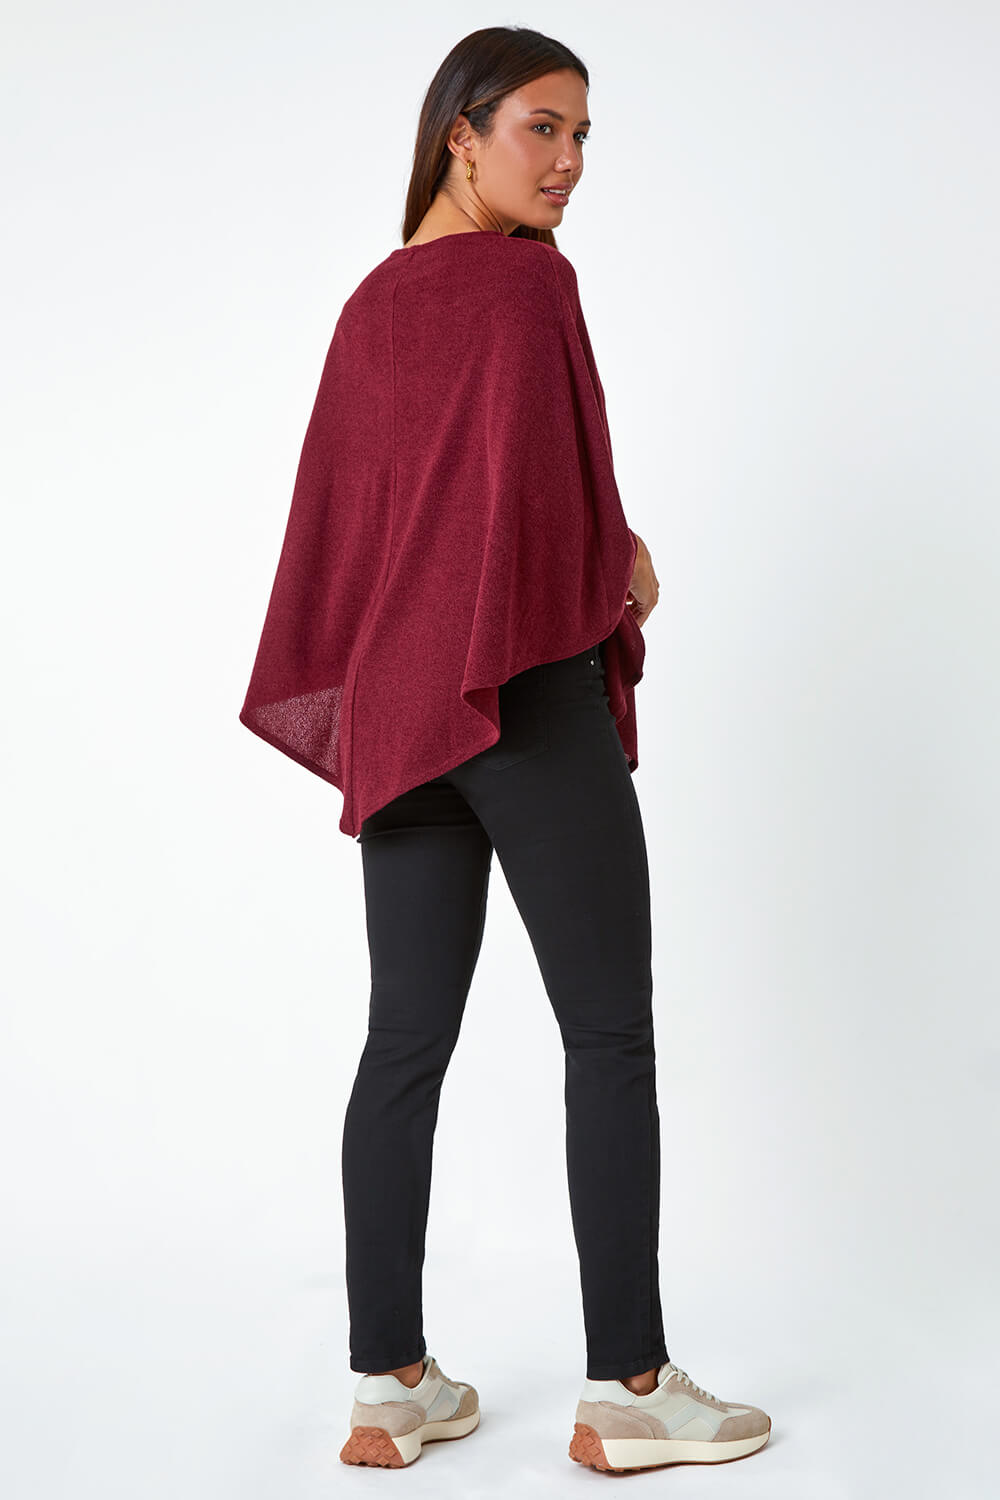 Wine Marl Overlay Stretch Top, Image 3 of 5